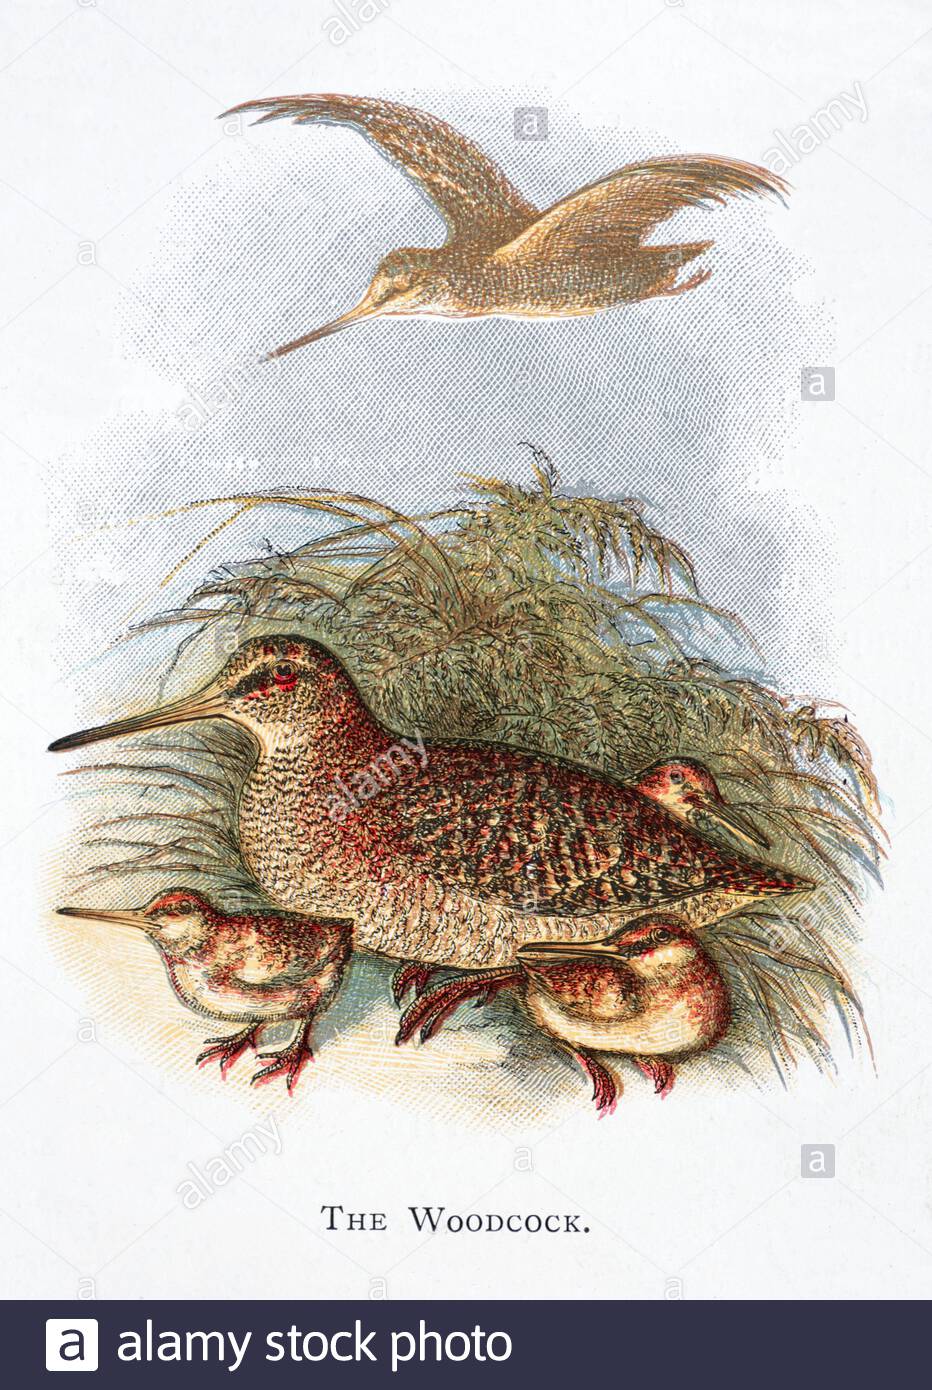 Woodcock (Scolopax rusticola), vintage illustration published in 1898 Stock Photo